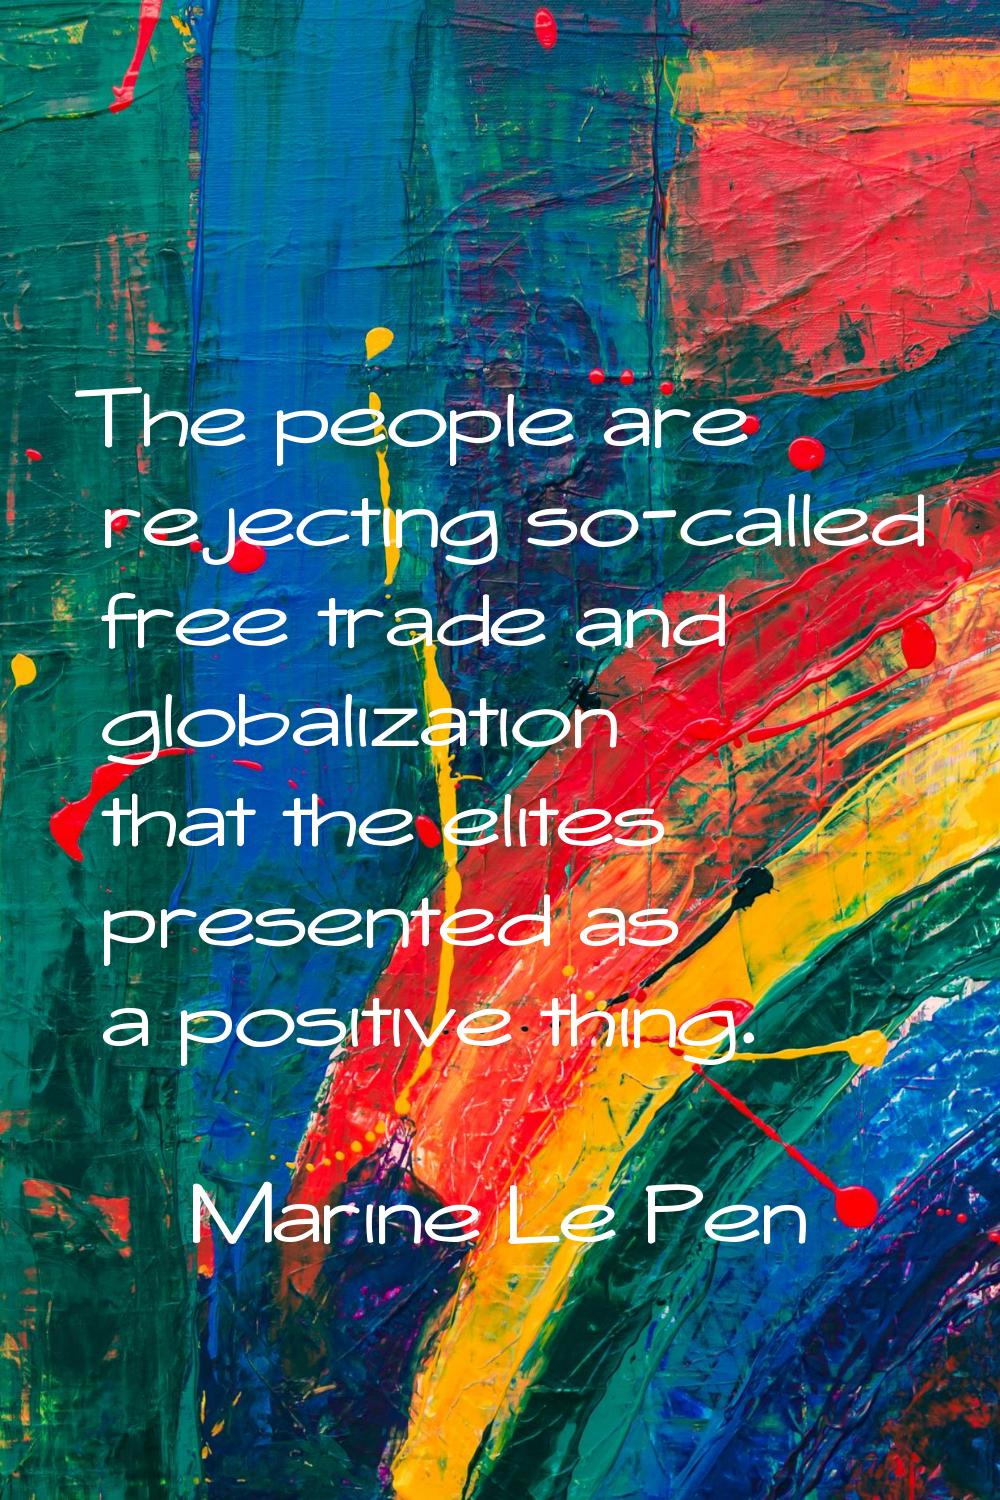 The people are rejecting so-called free trade and globalization that the elites presented as a posi